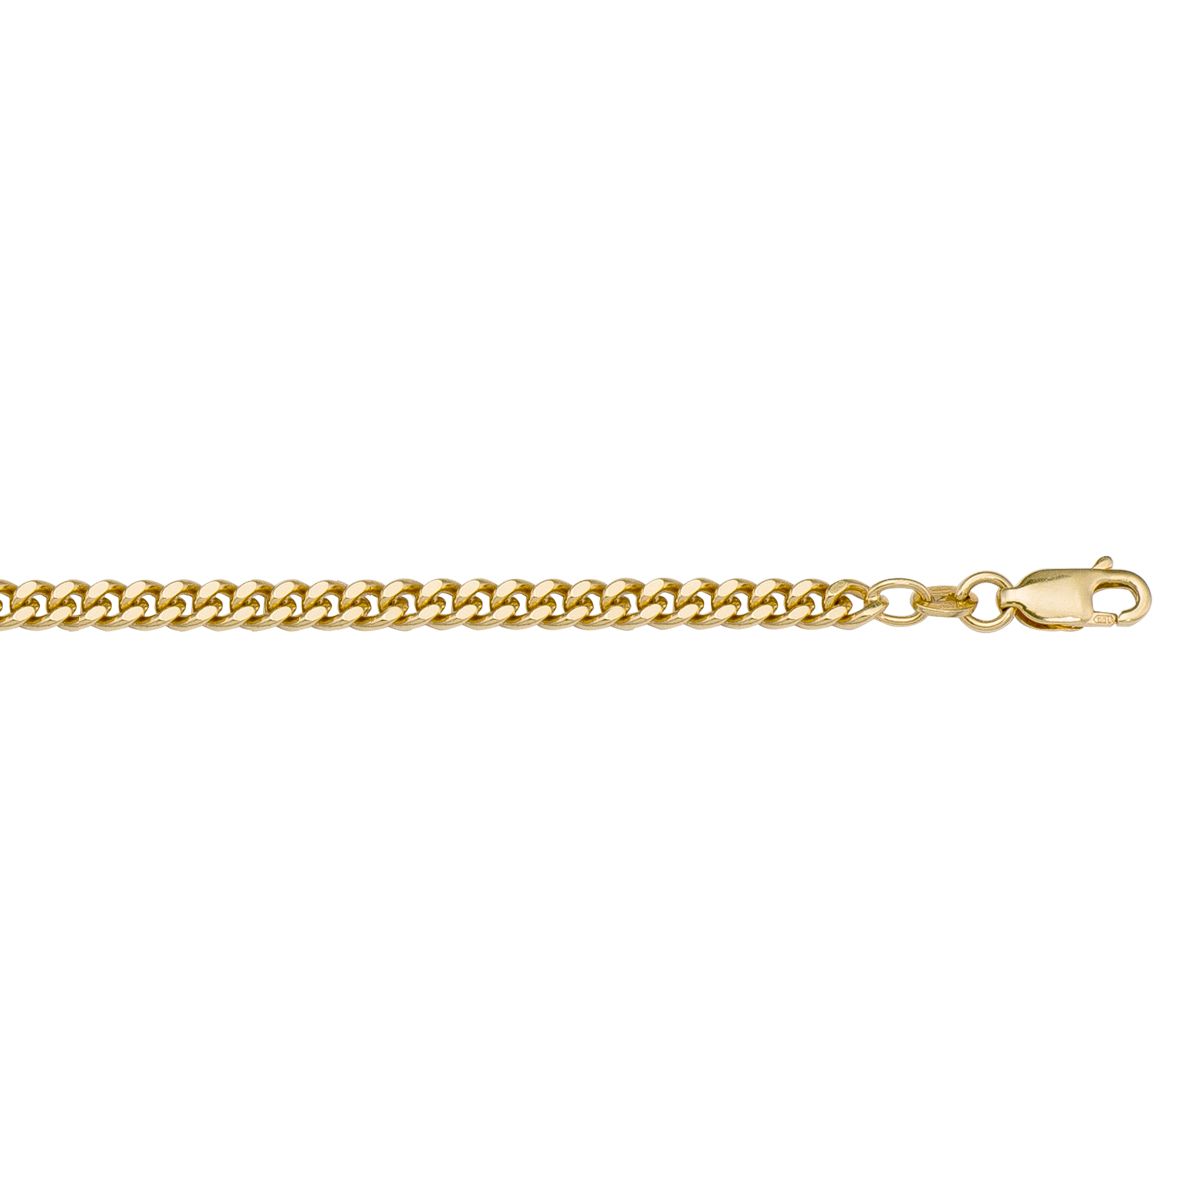 CCRB01, Gold Chain, Curb, Yellow Gold, 2.0 to 3.5 mm